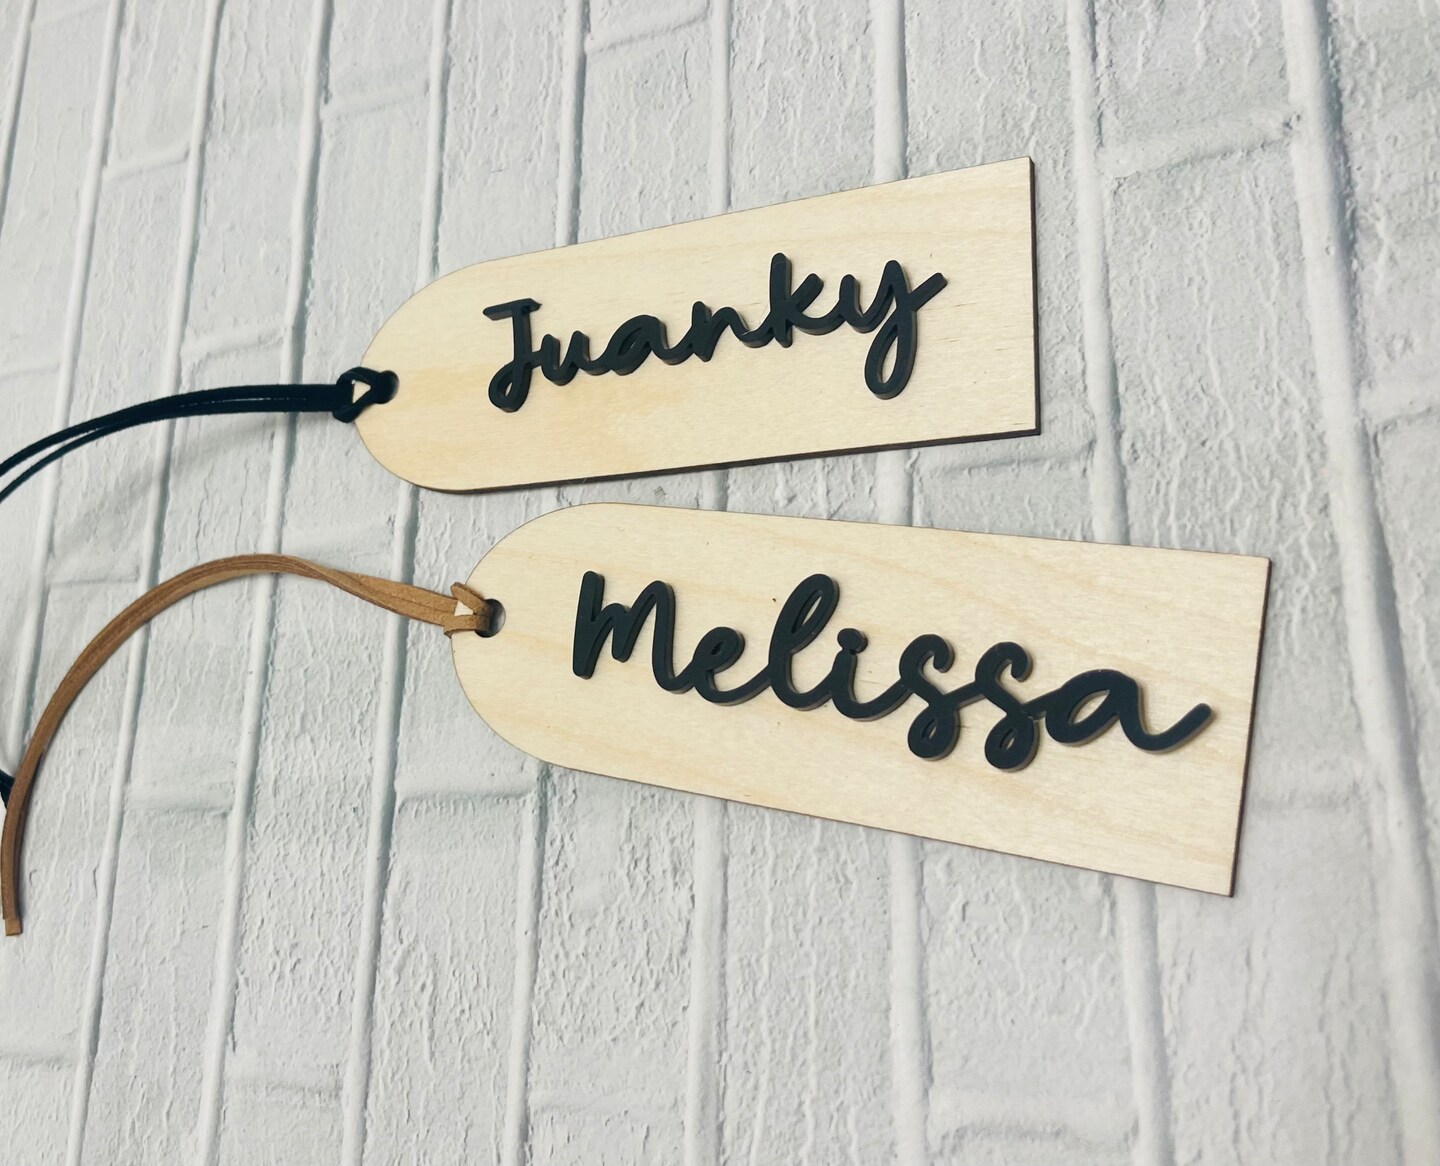 Modern Engraved Stocking Tag, Name Tags, Gift Tags